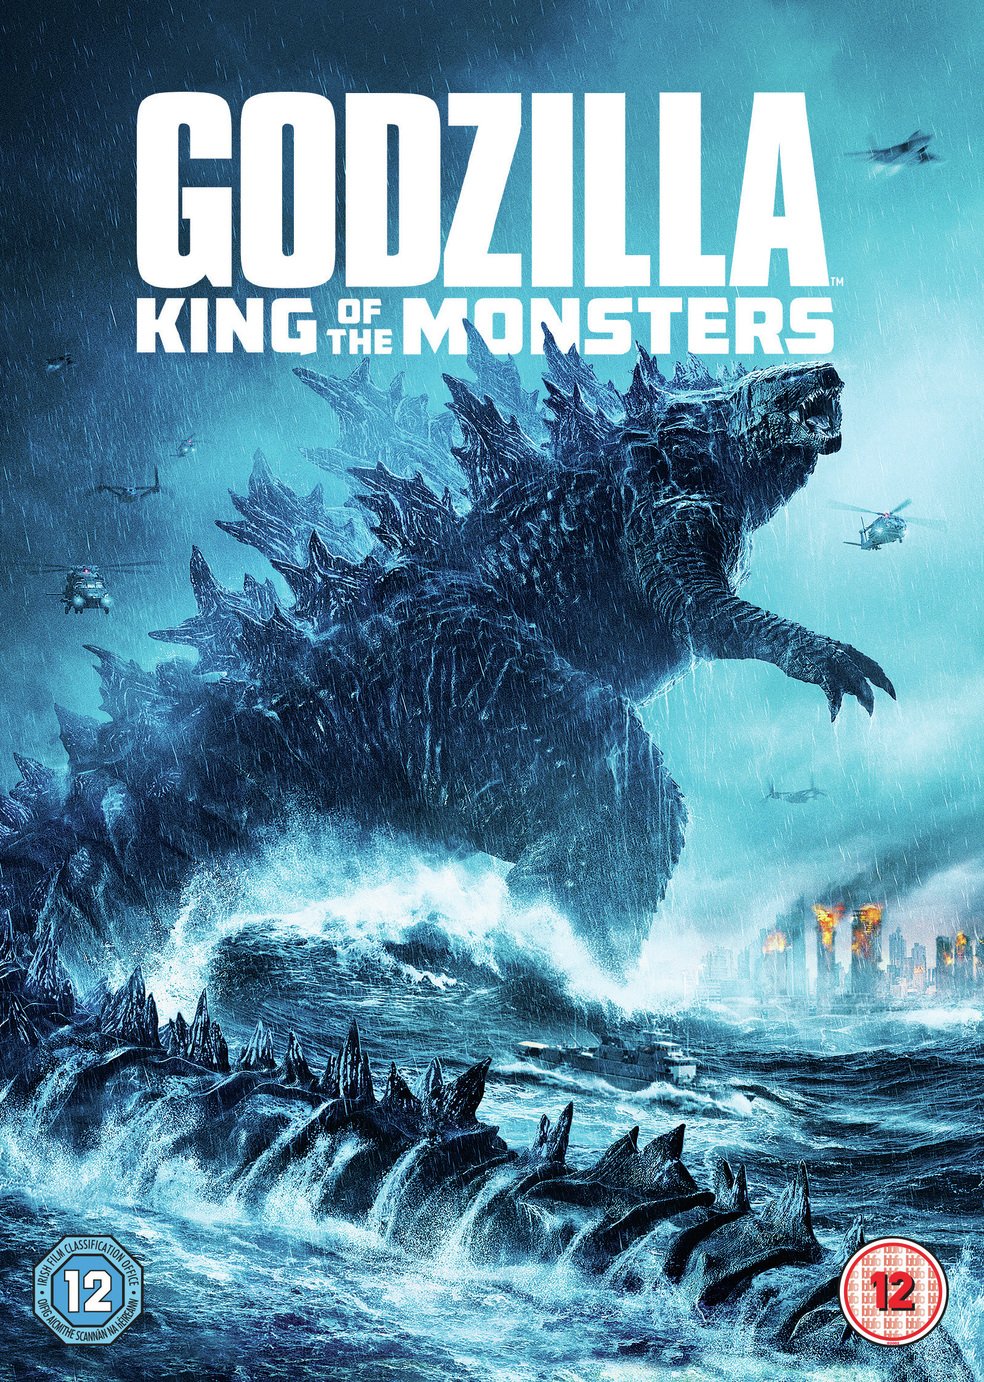 Godzilla: King of the Monsters DVD Review